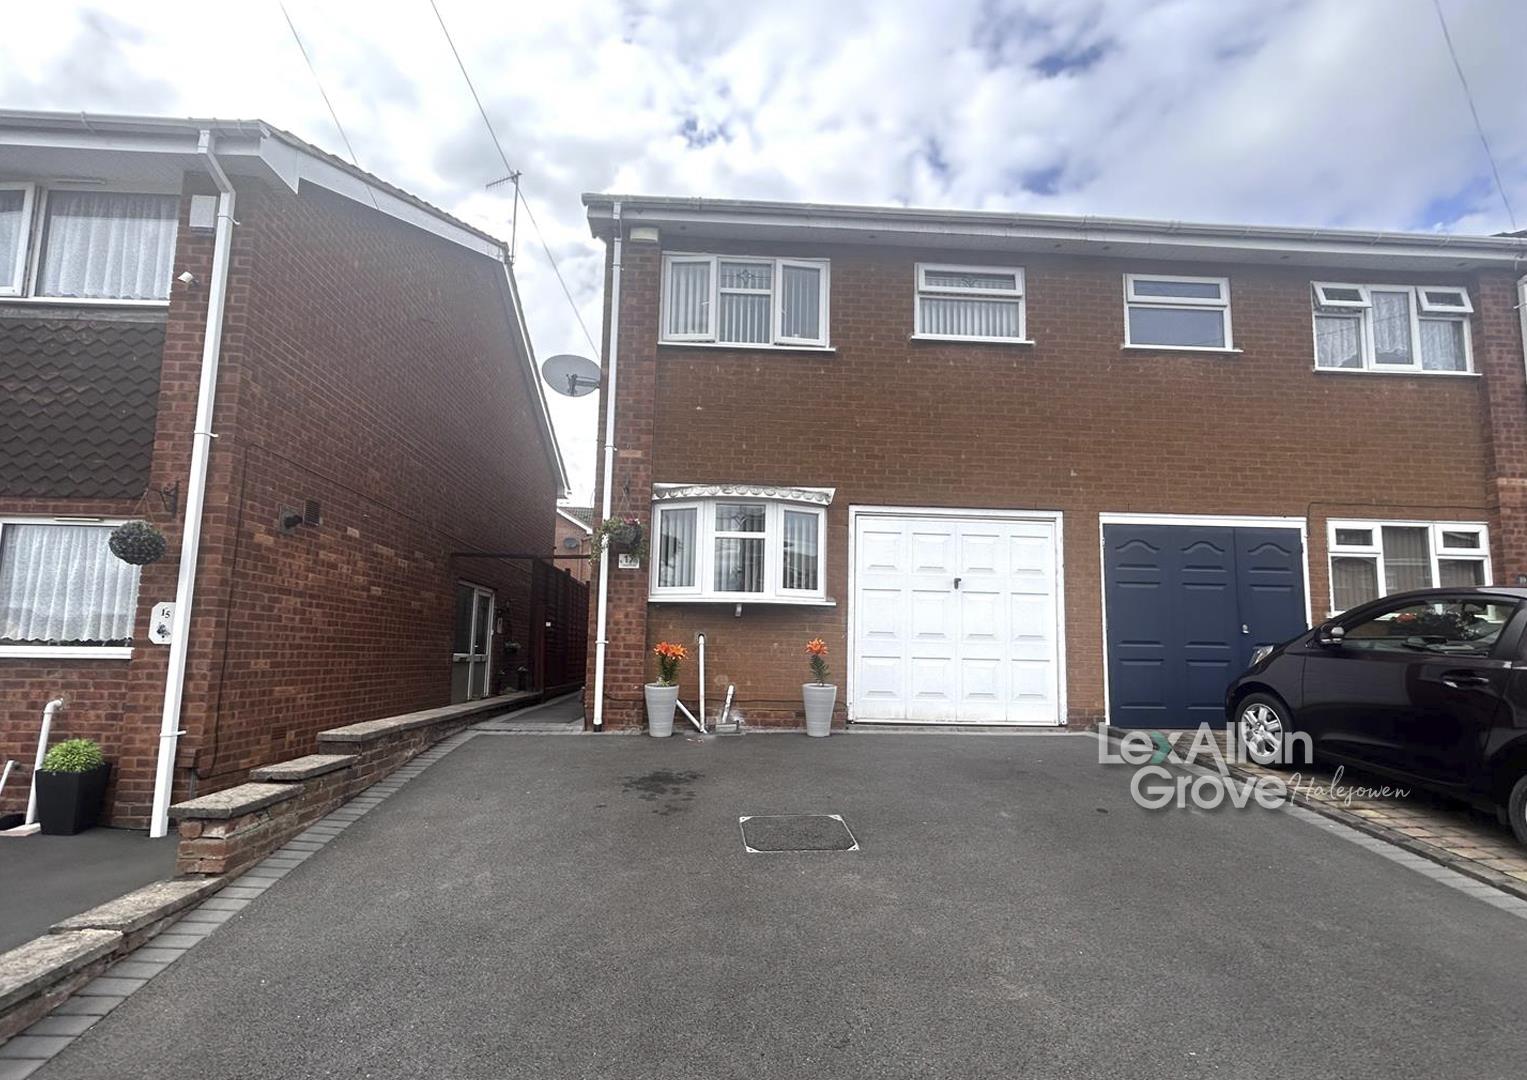 3 bed semi-detached house for sale in Lotus Drive, Cradley Heath - Property Image 1